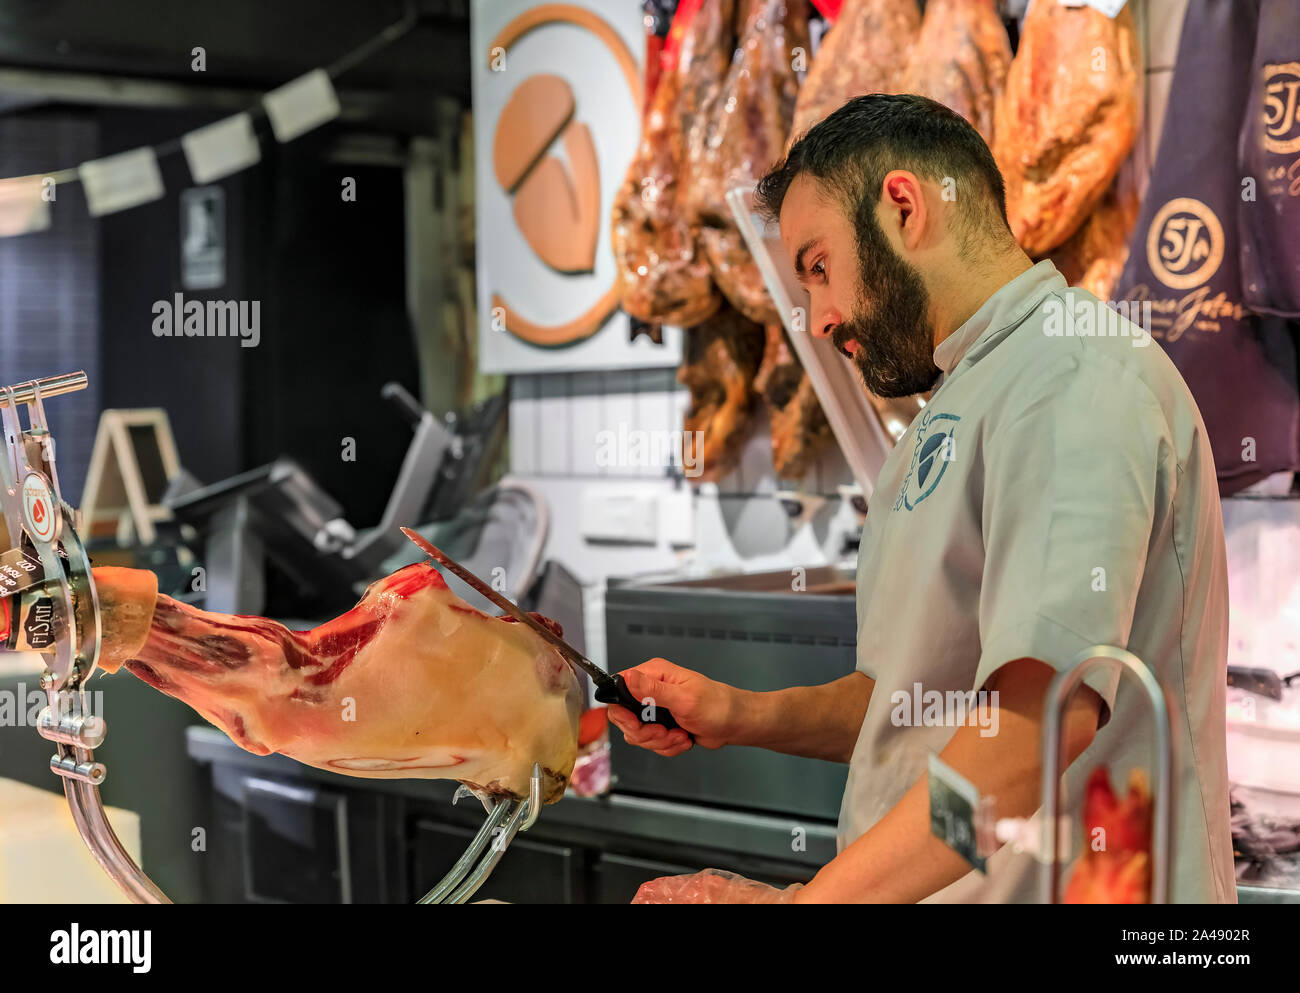 Madrid, Spain - June 4, 2017: Butcher slicing a whole leg of serrano iberico ham on a stand for customers at a market, hams hanging in the background Stock Photo